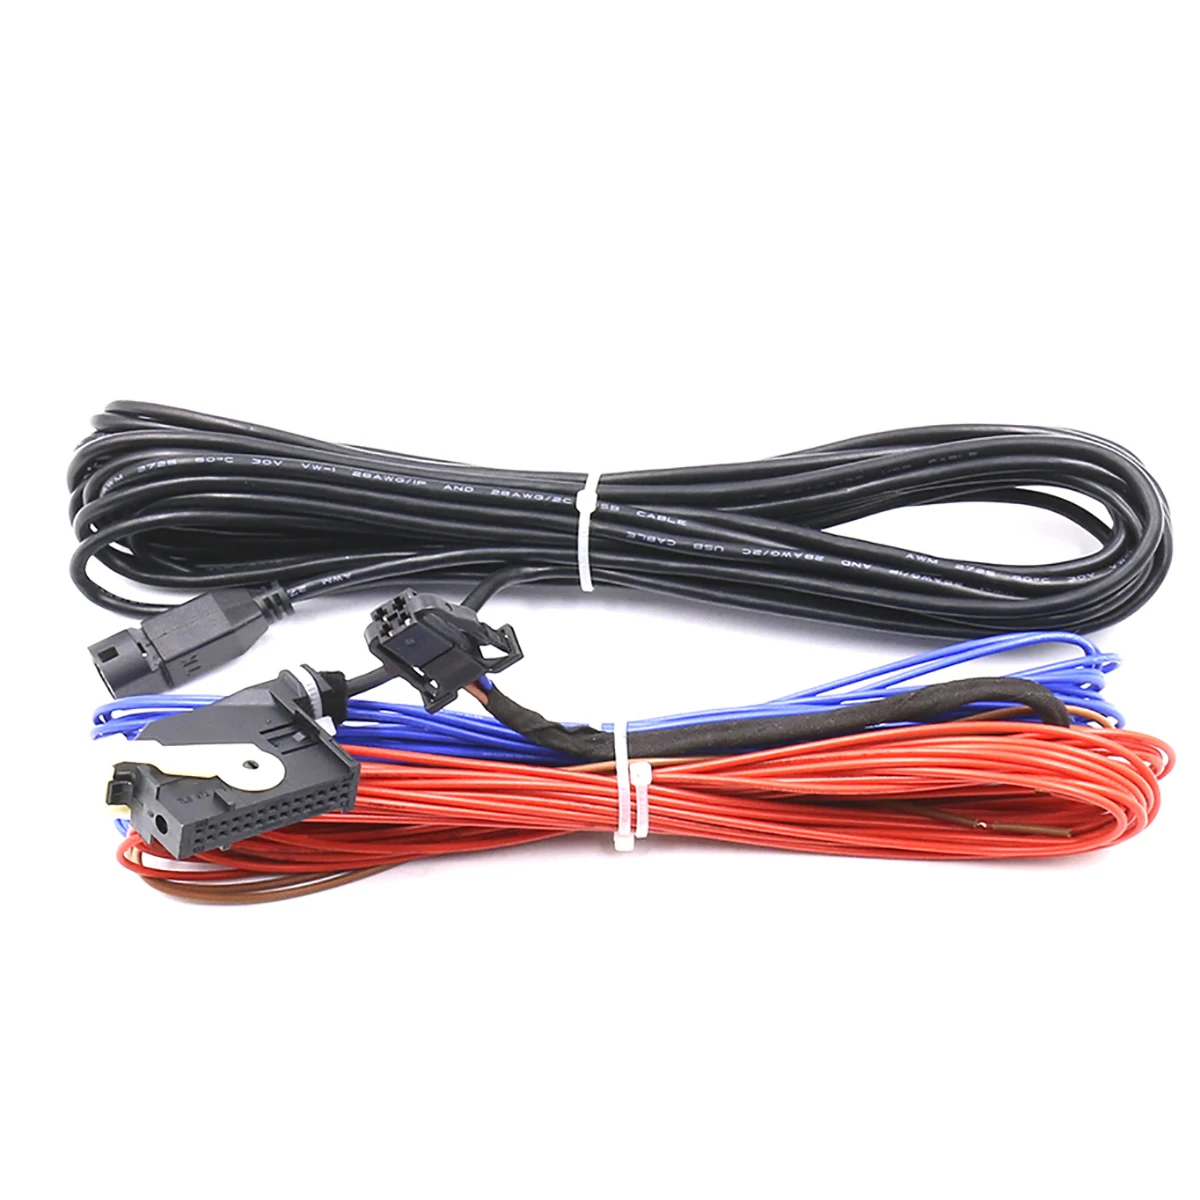 FOR RCD510 RNS315 RNS510 VW JETTA M5 MK6 TIGUAN RGB Rear View Reversing Camera harness Cable wire